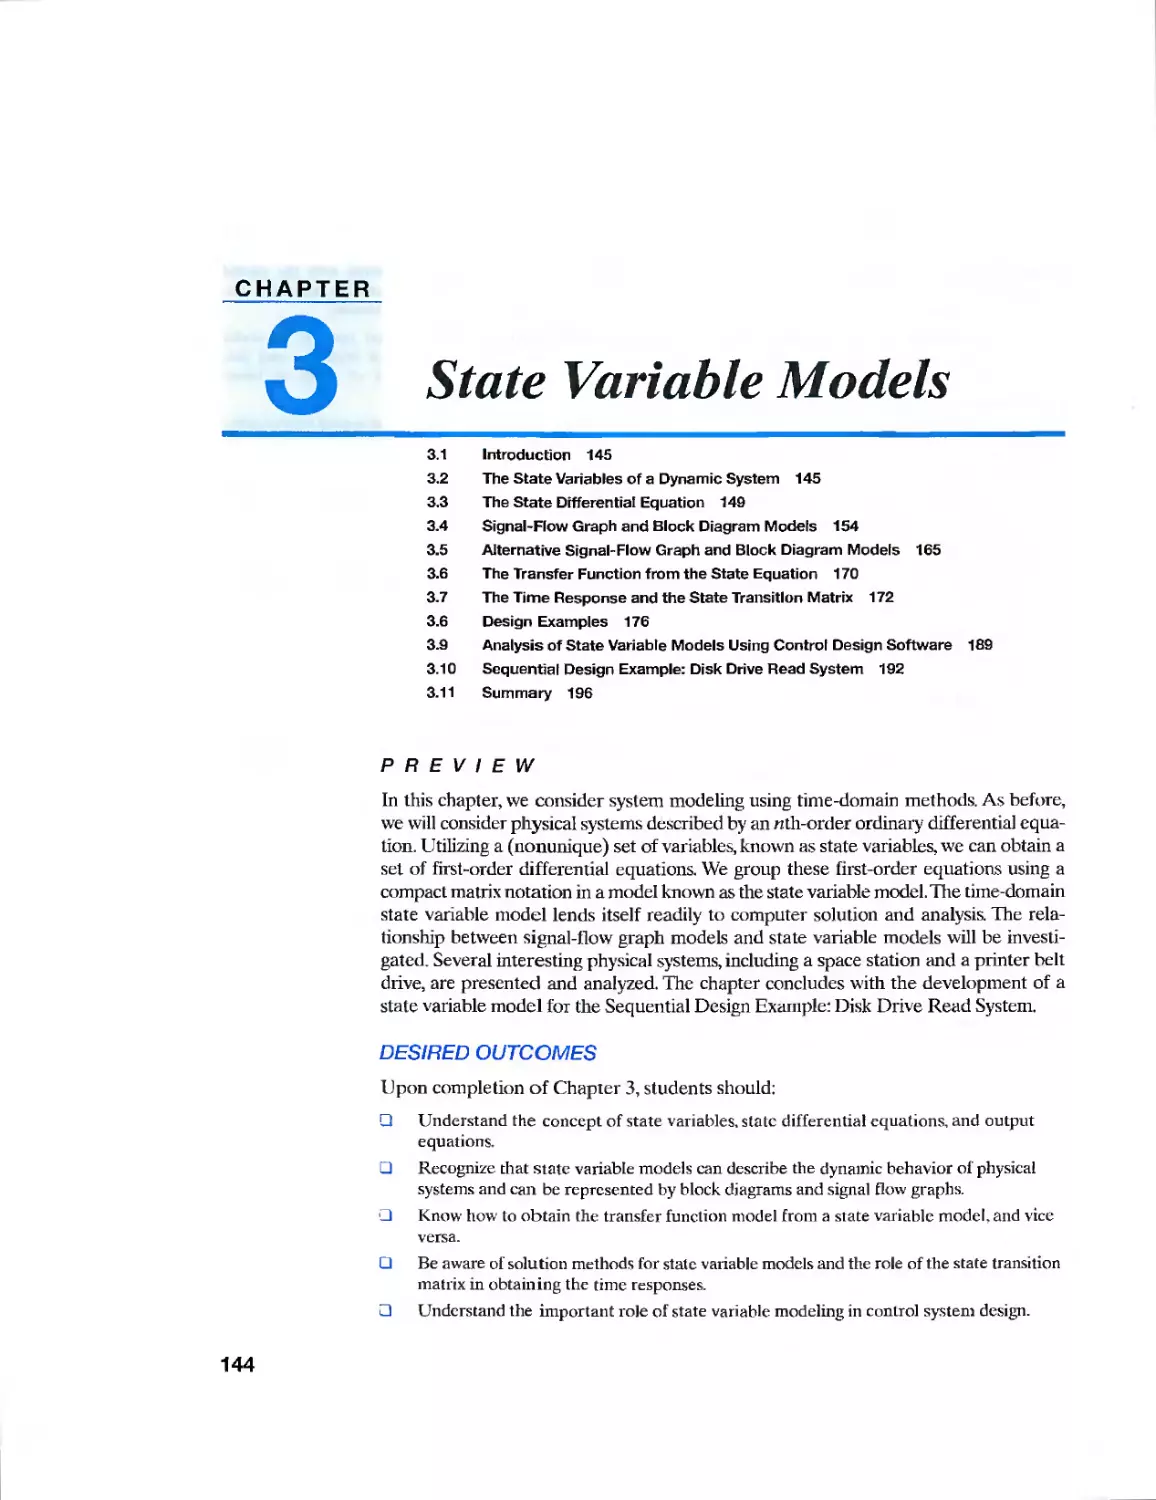 3 State Variable Models